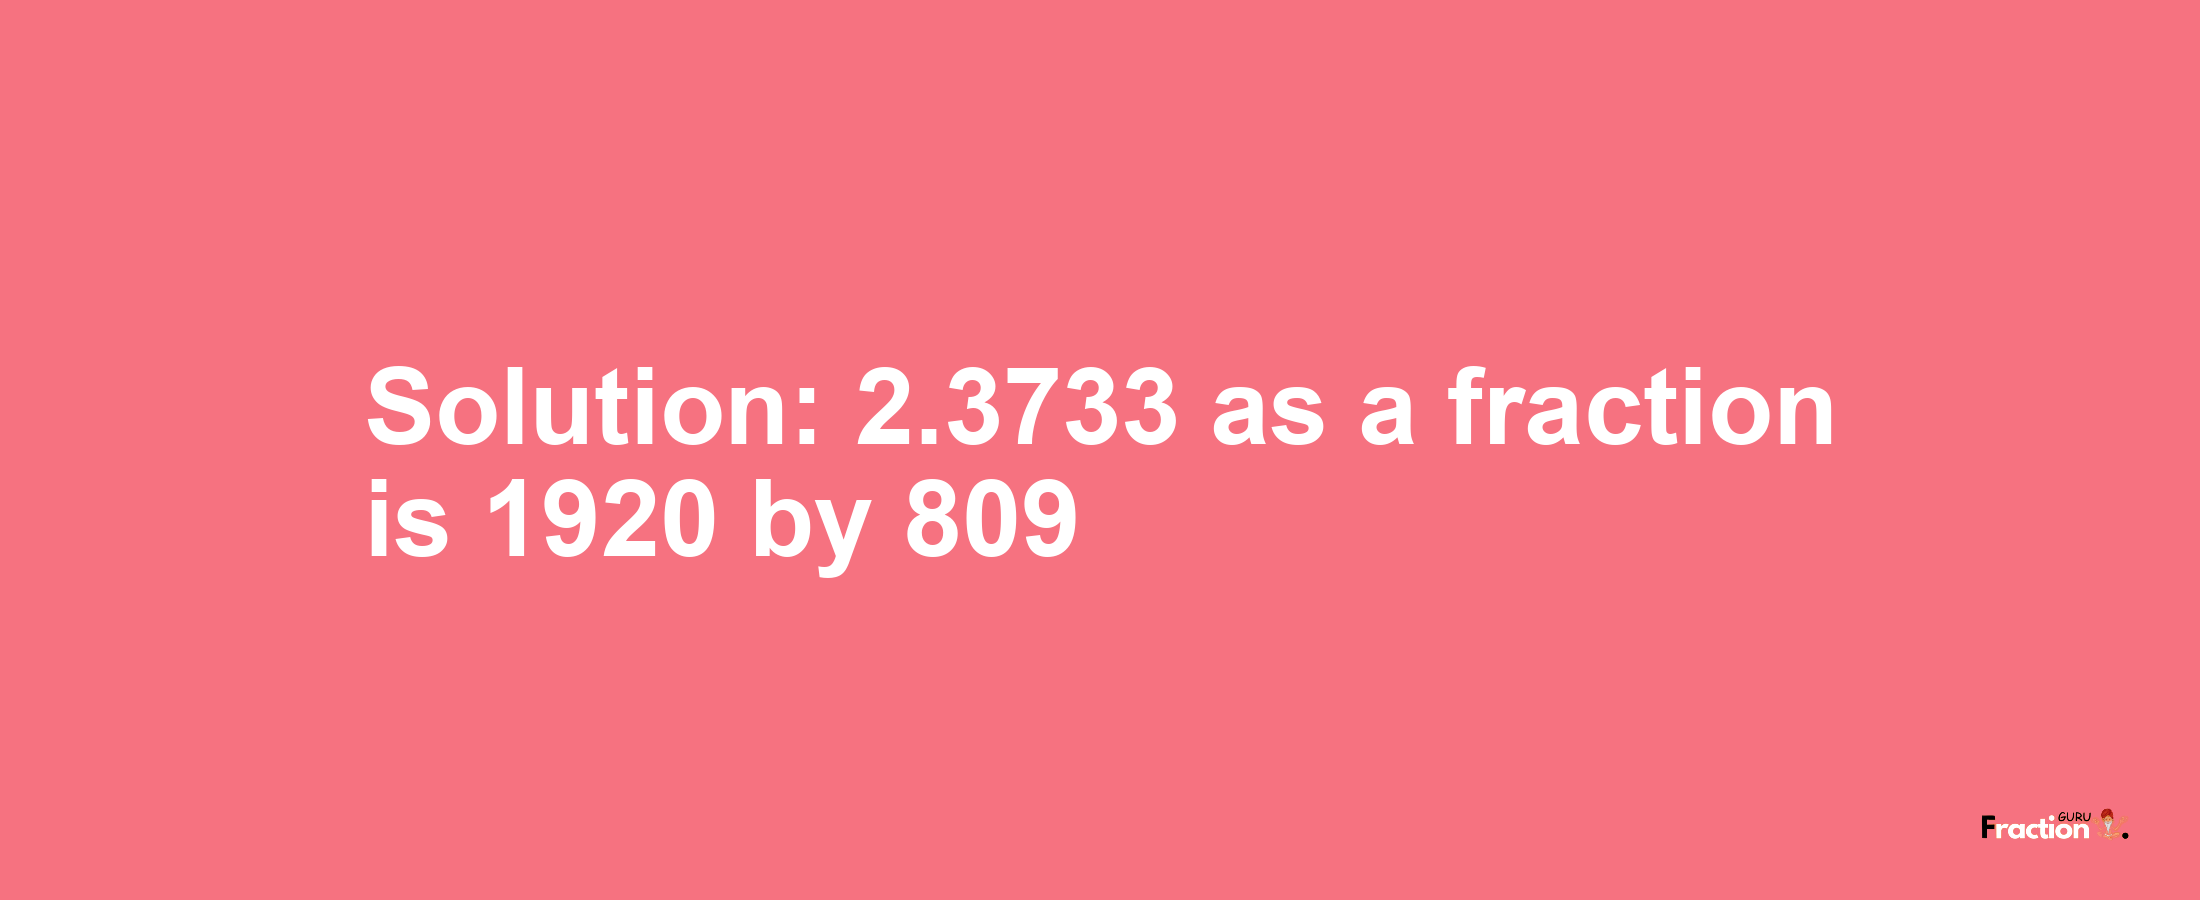 Solution:2.3733 as a fraction is 1920/809